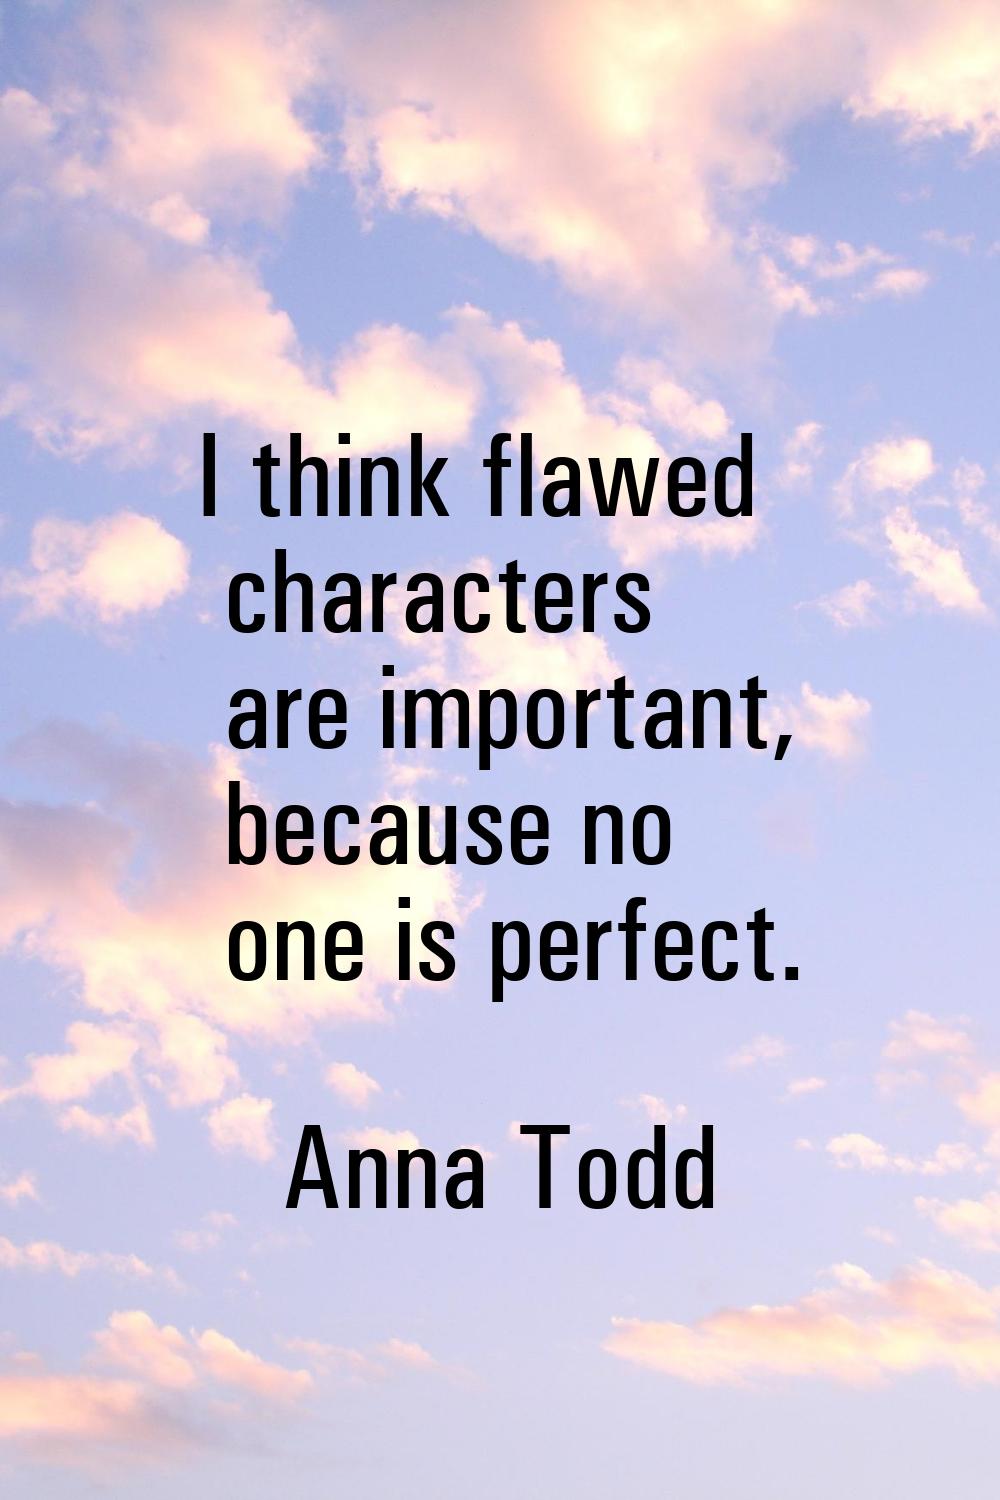 I think flawed characters are important, because no one is perfect.